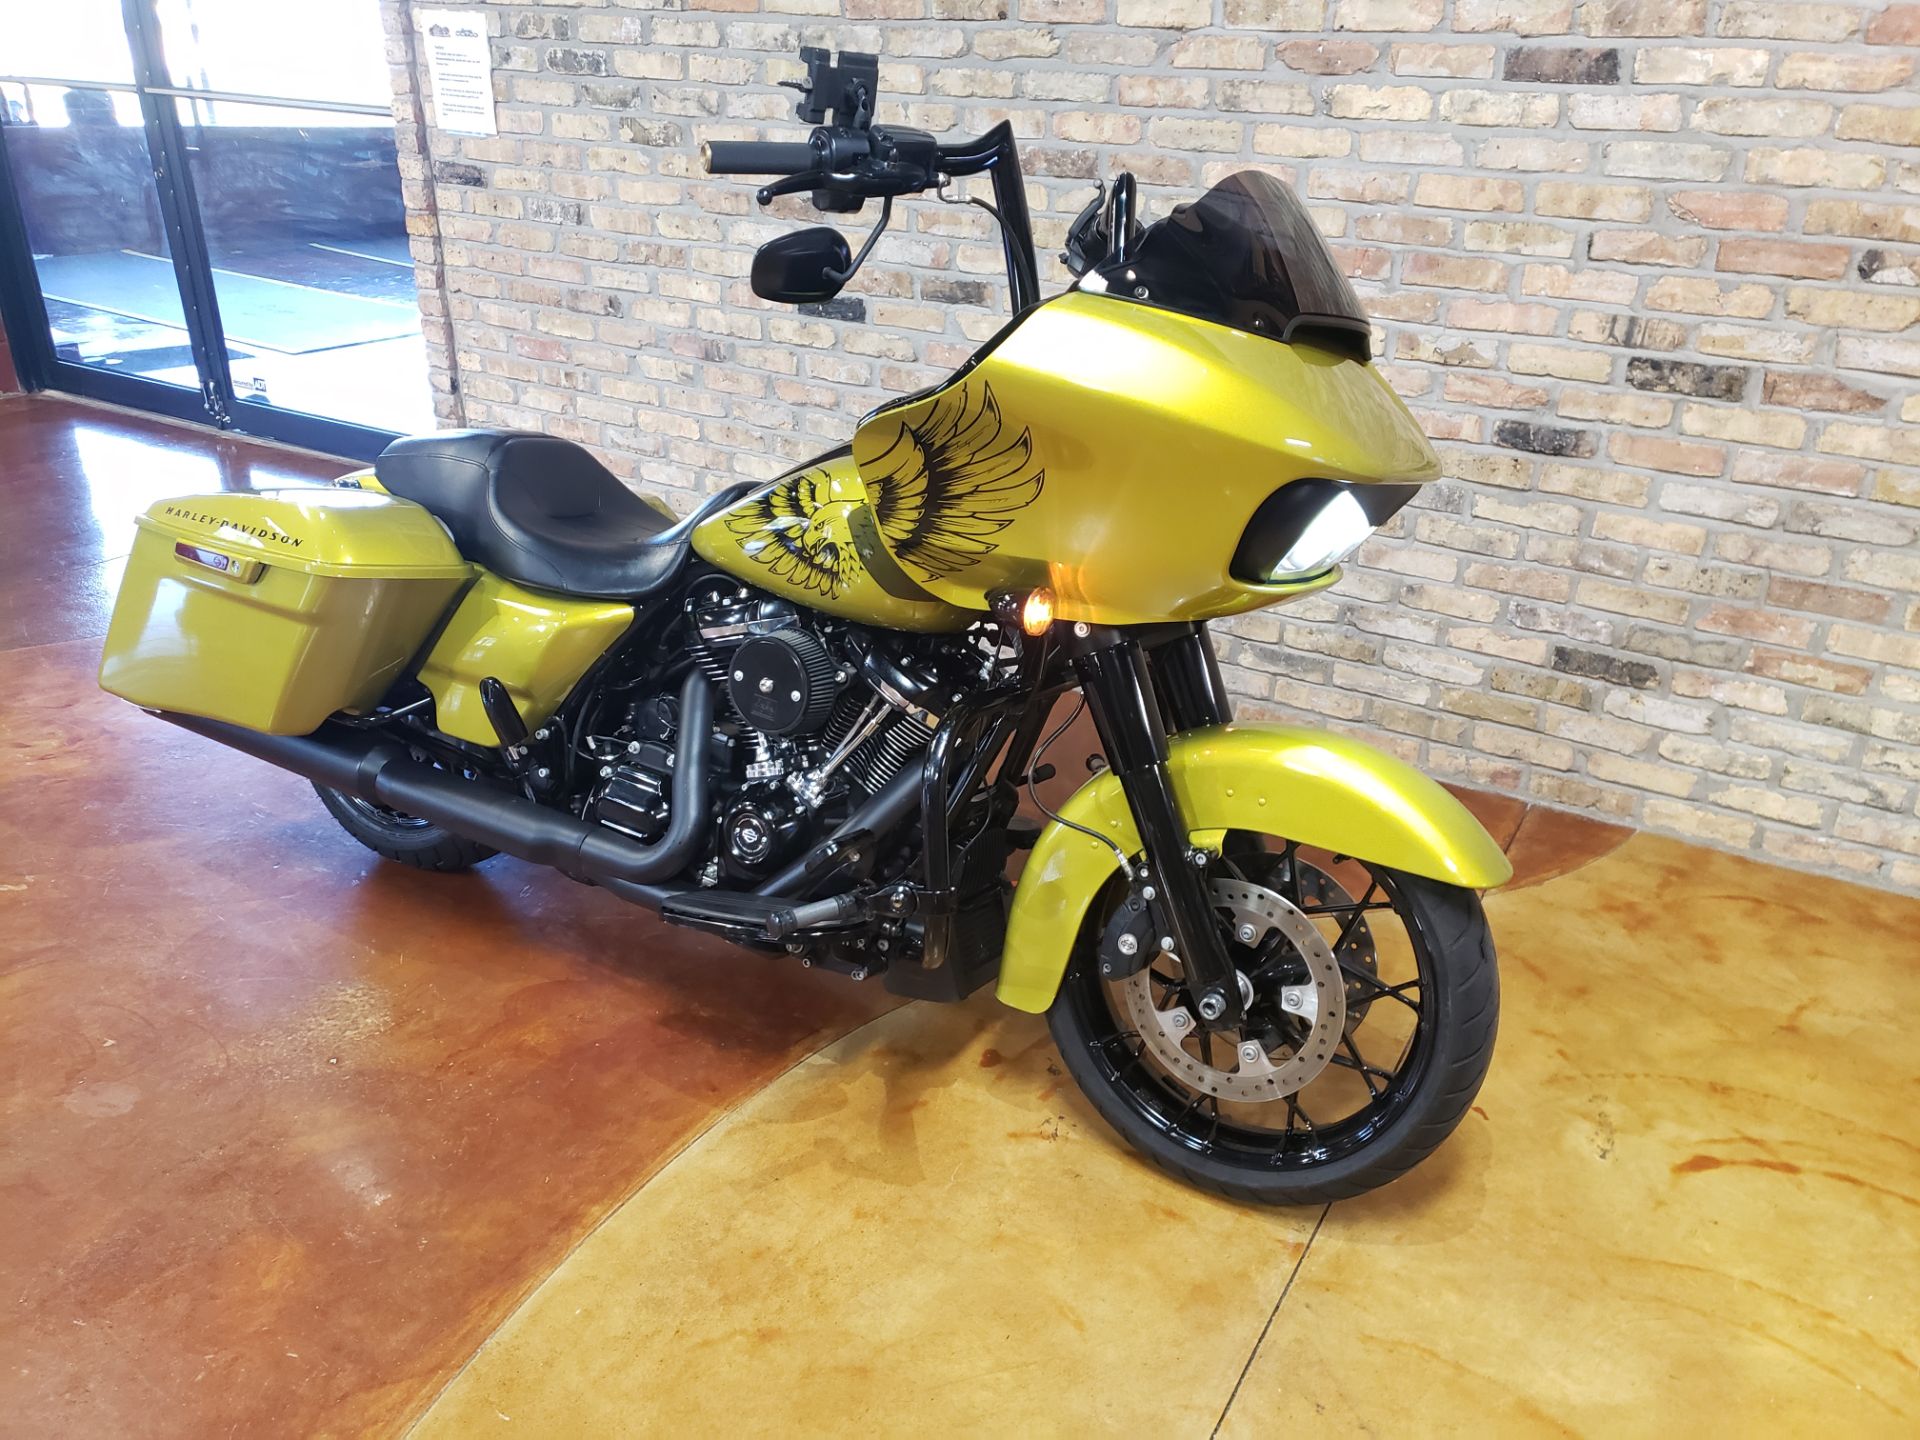 2020 Harley-Davidson Road Glide® Special in Big Bend, Wisconsin - Photo 12